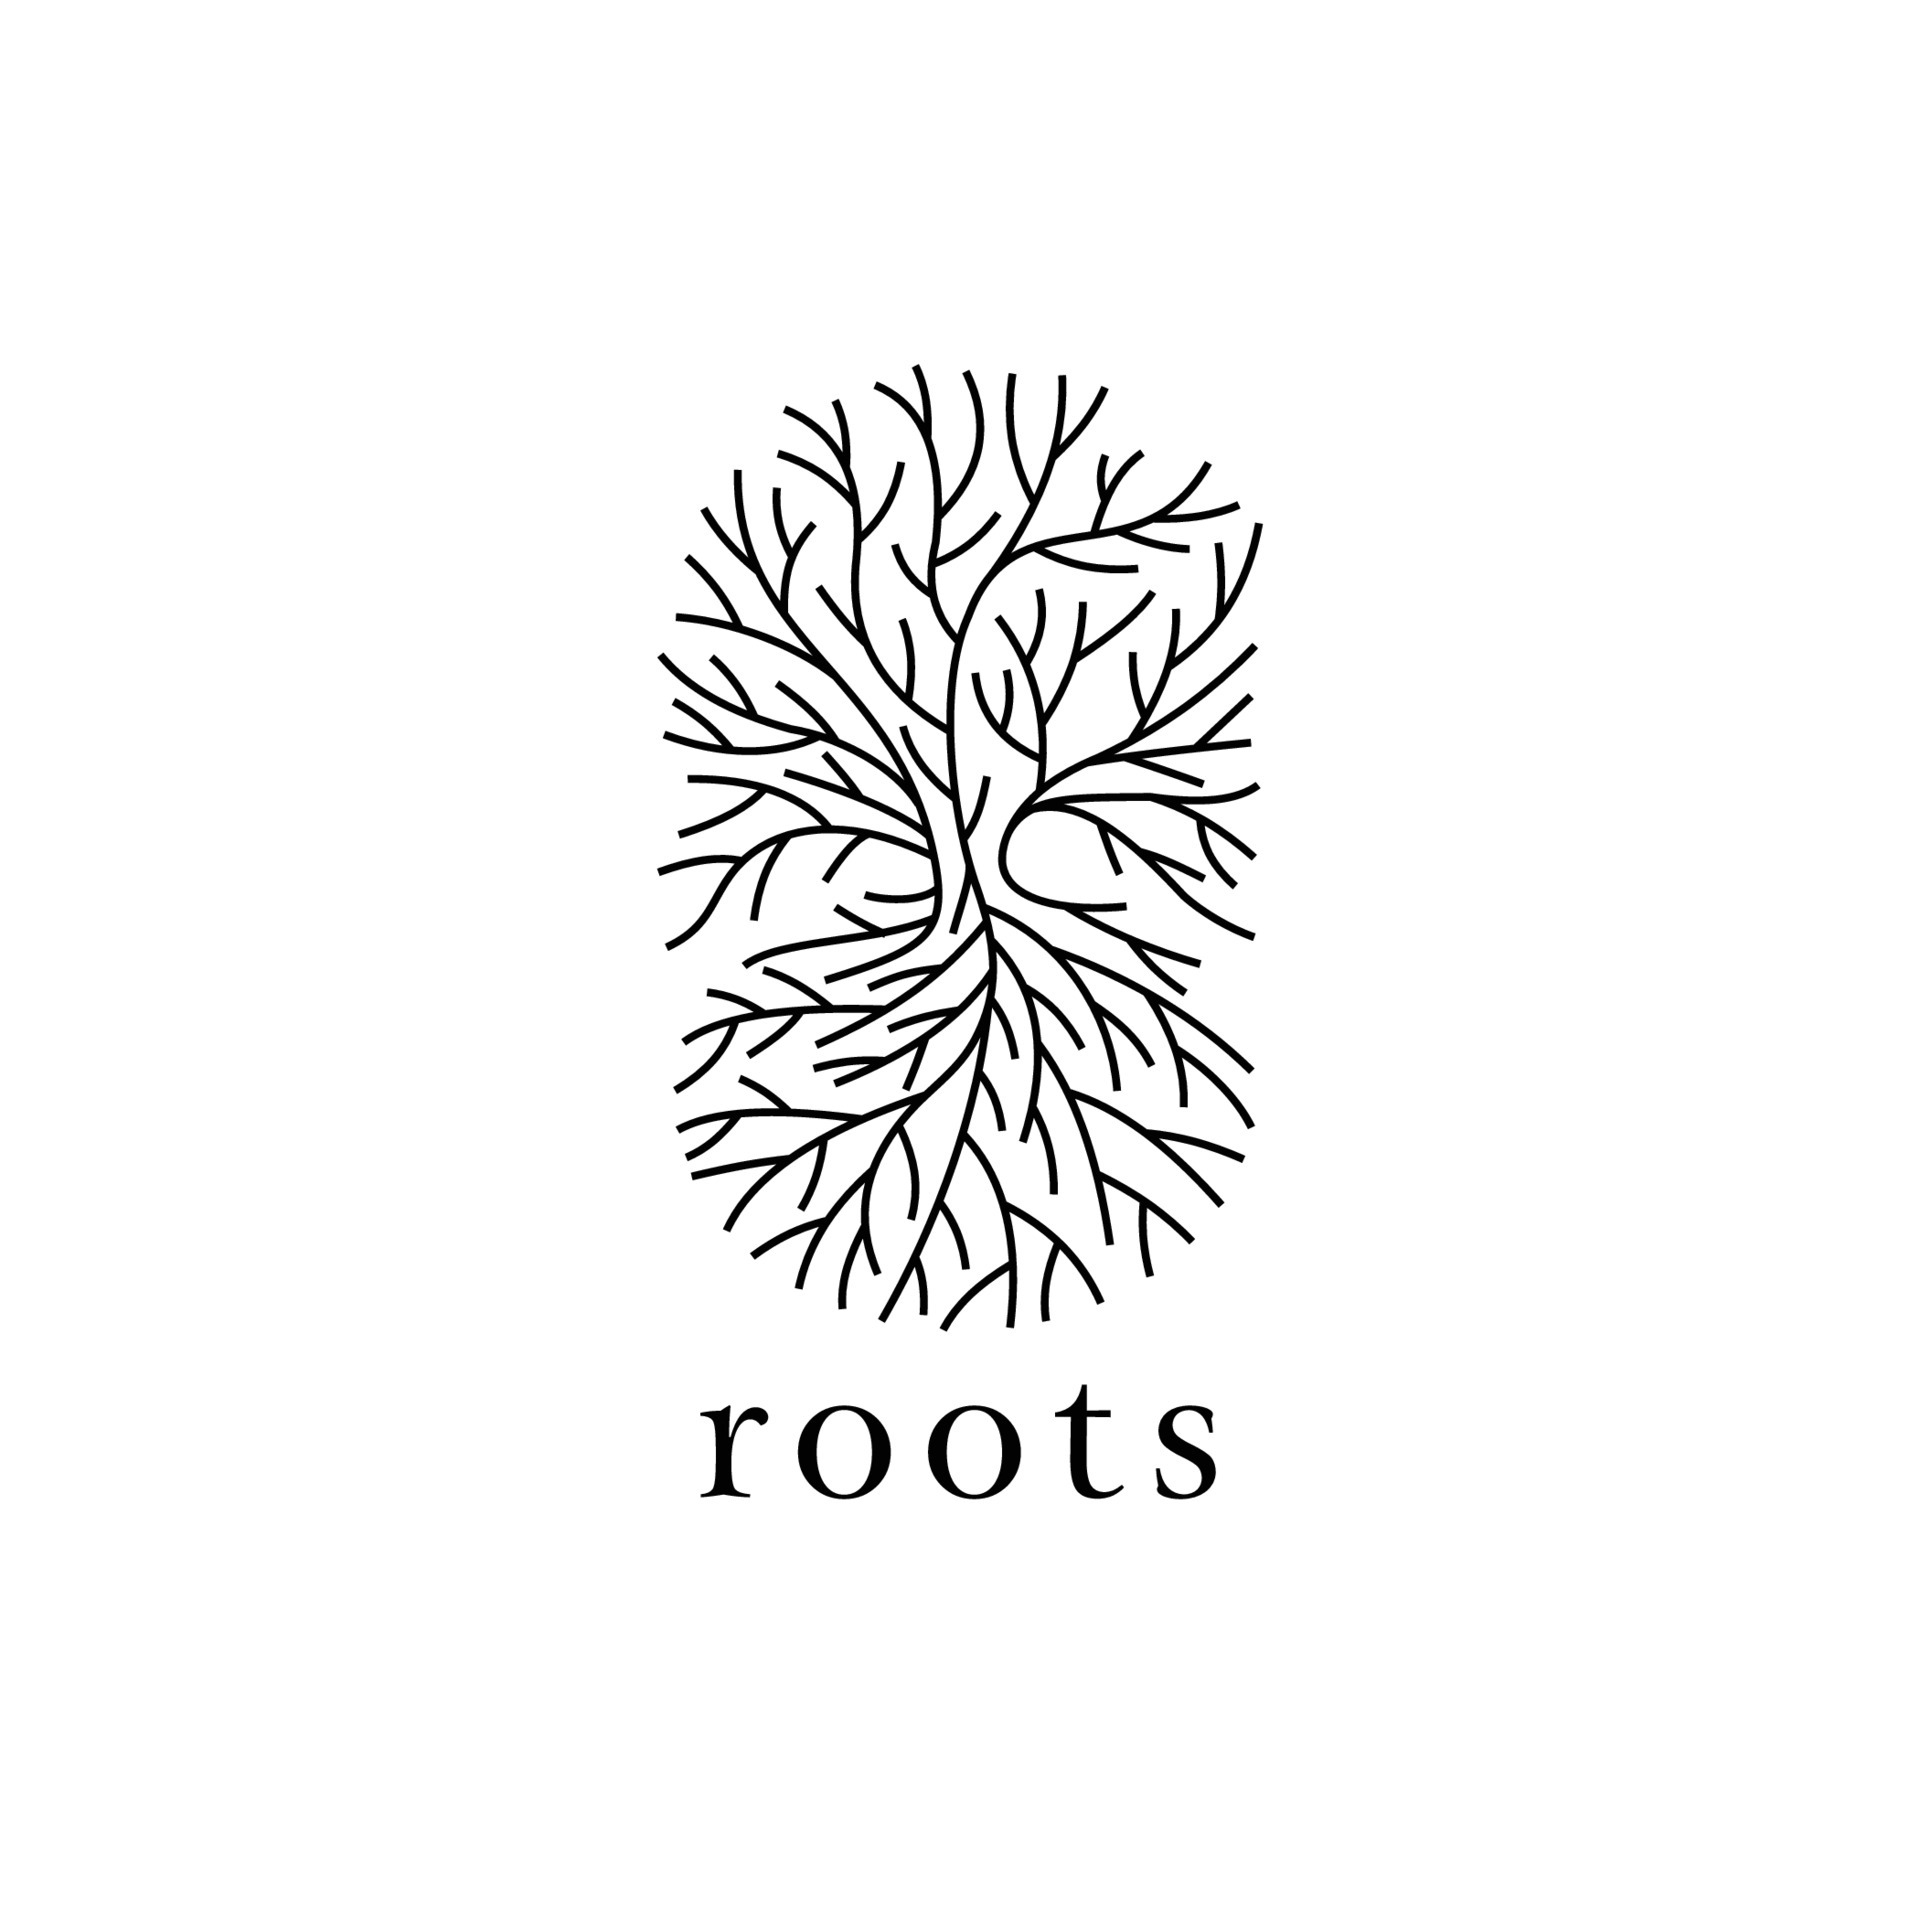 illustration logo vector graphic of dry trees and fibrous roots, good ...